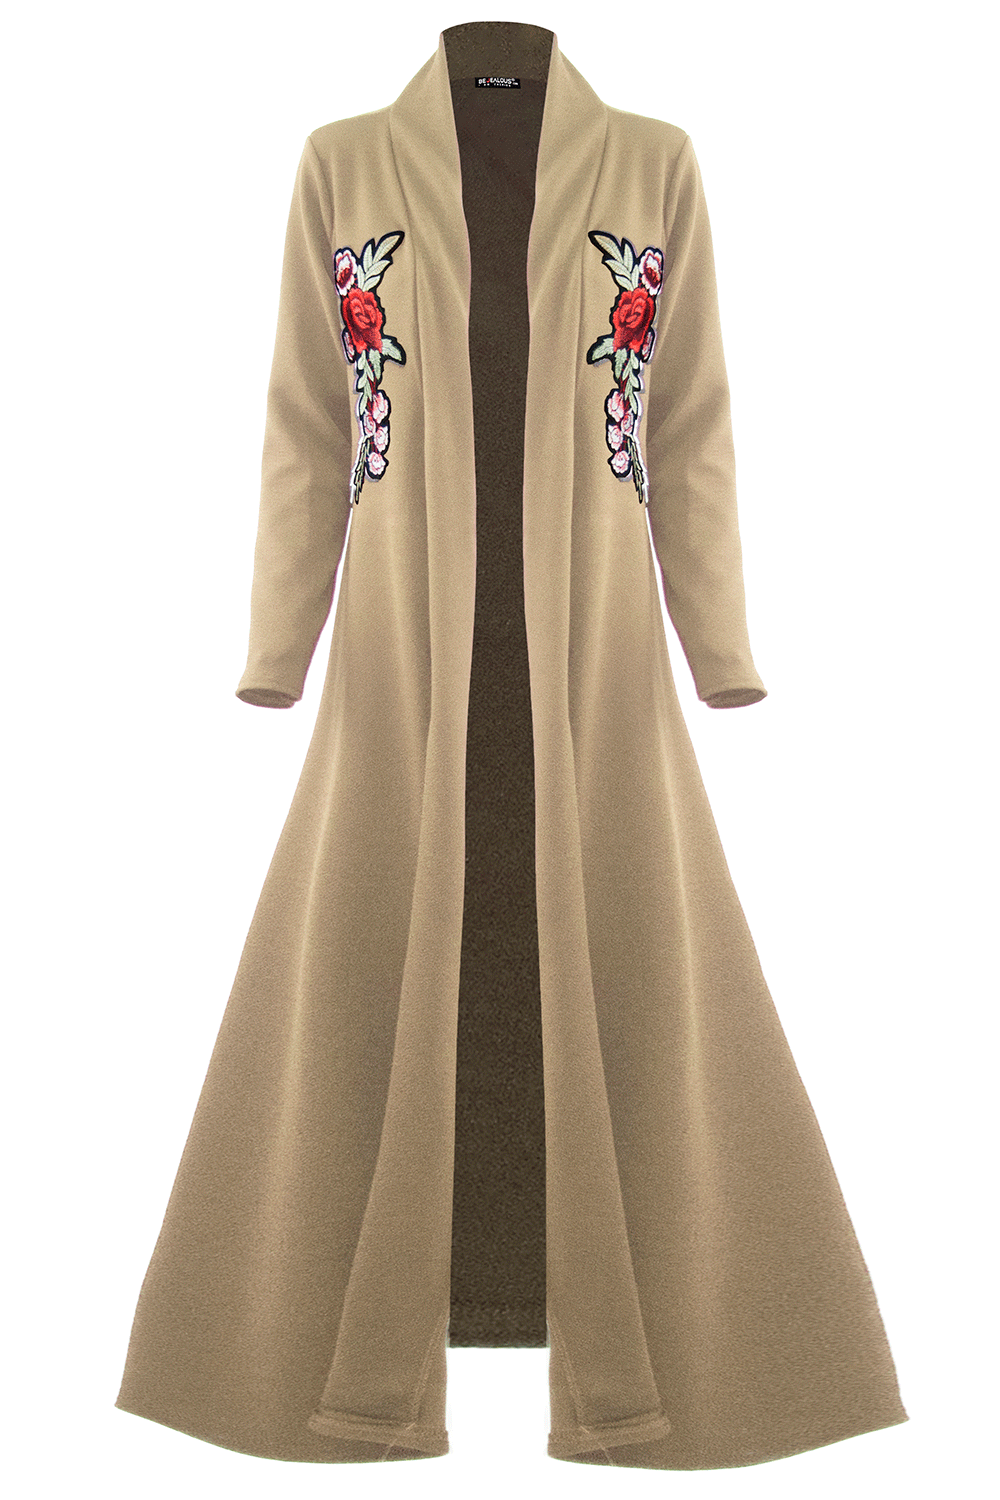 Paris Long Sleeve Floral Embroidered Maxi Jacket